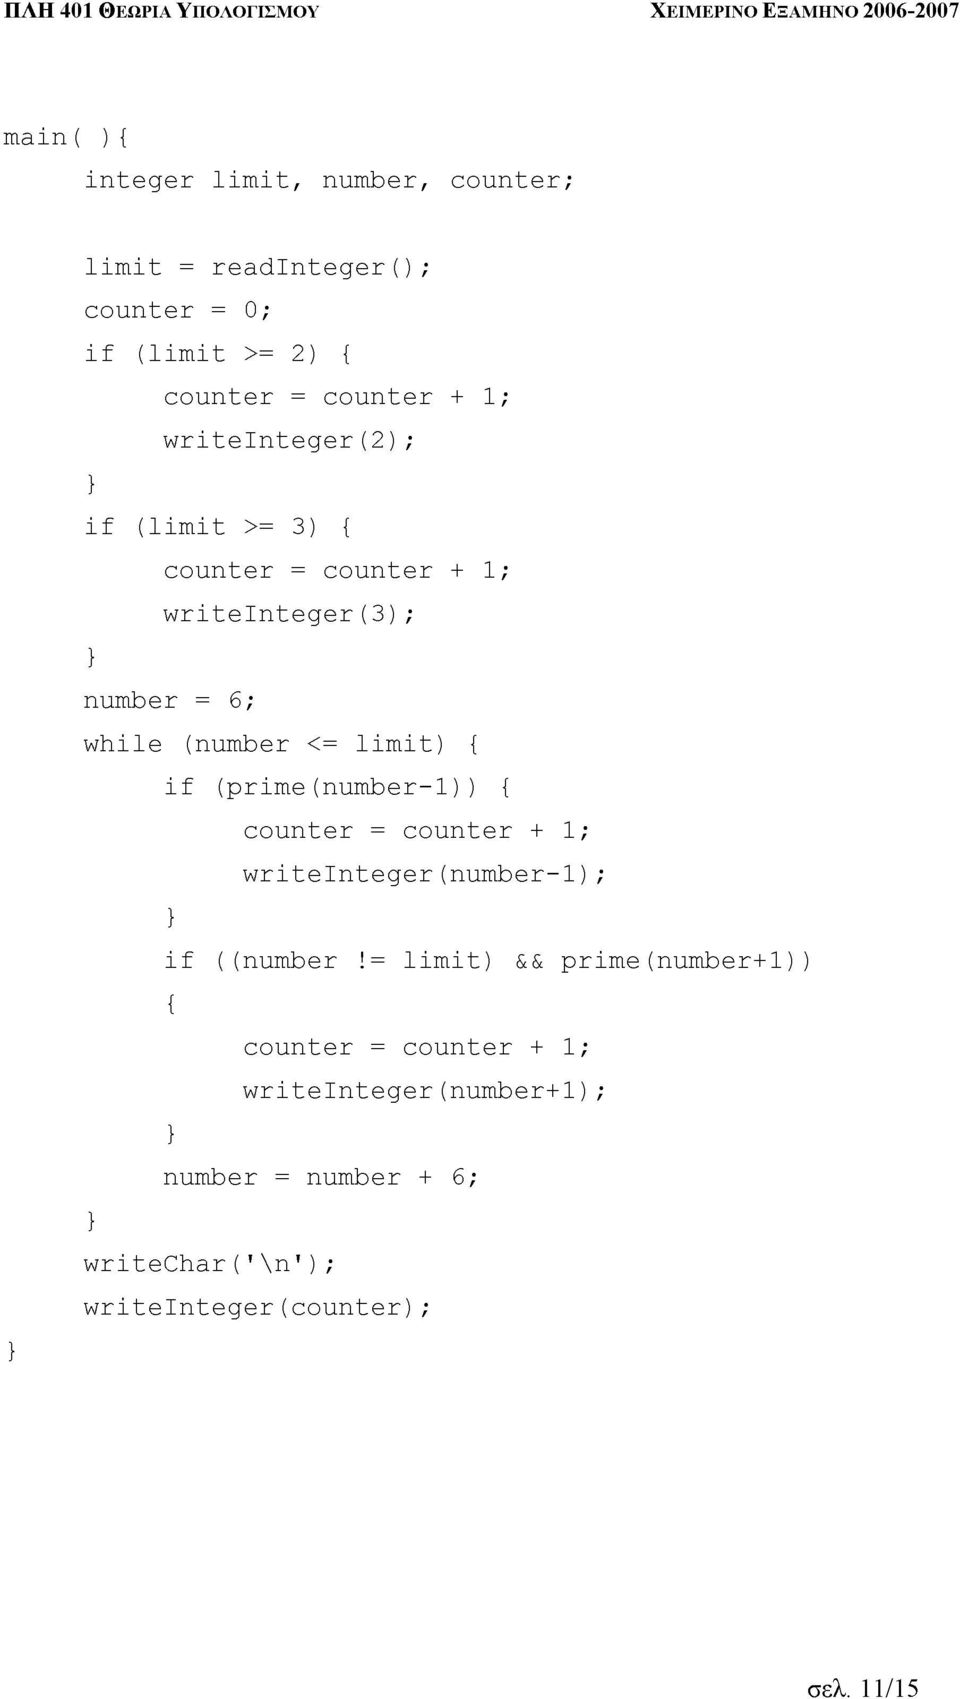 + 1; if = 6; (number <= limit) { if (prime(number-1)) counter counter { { writeinteger(number-1); 1; }((number counter